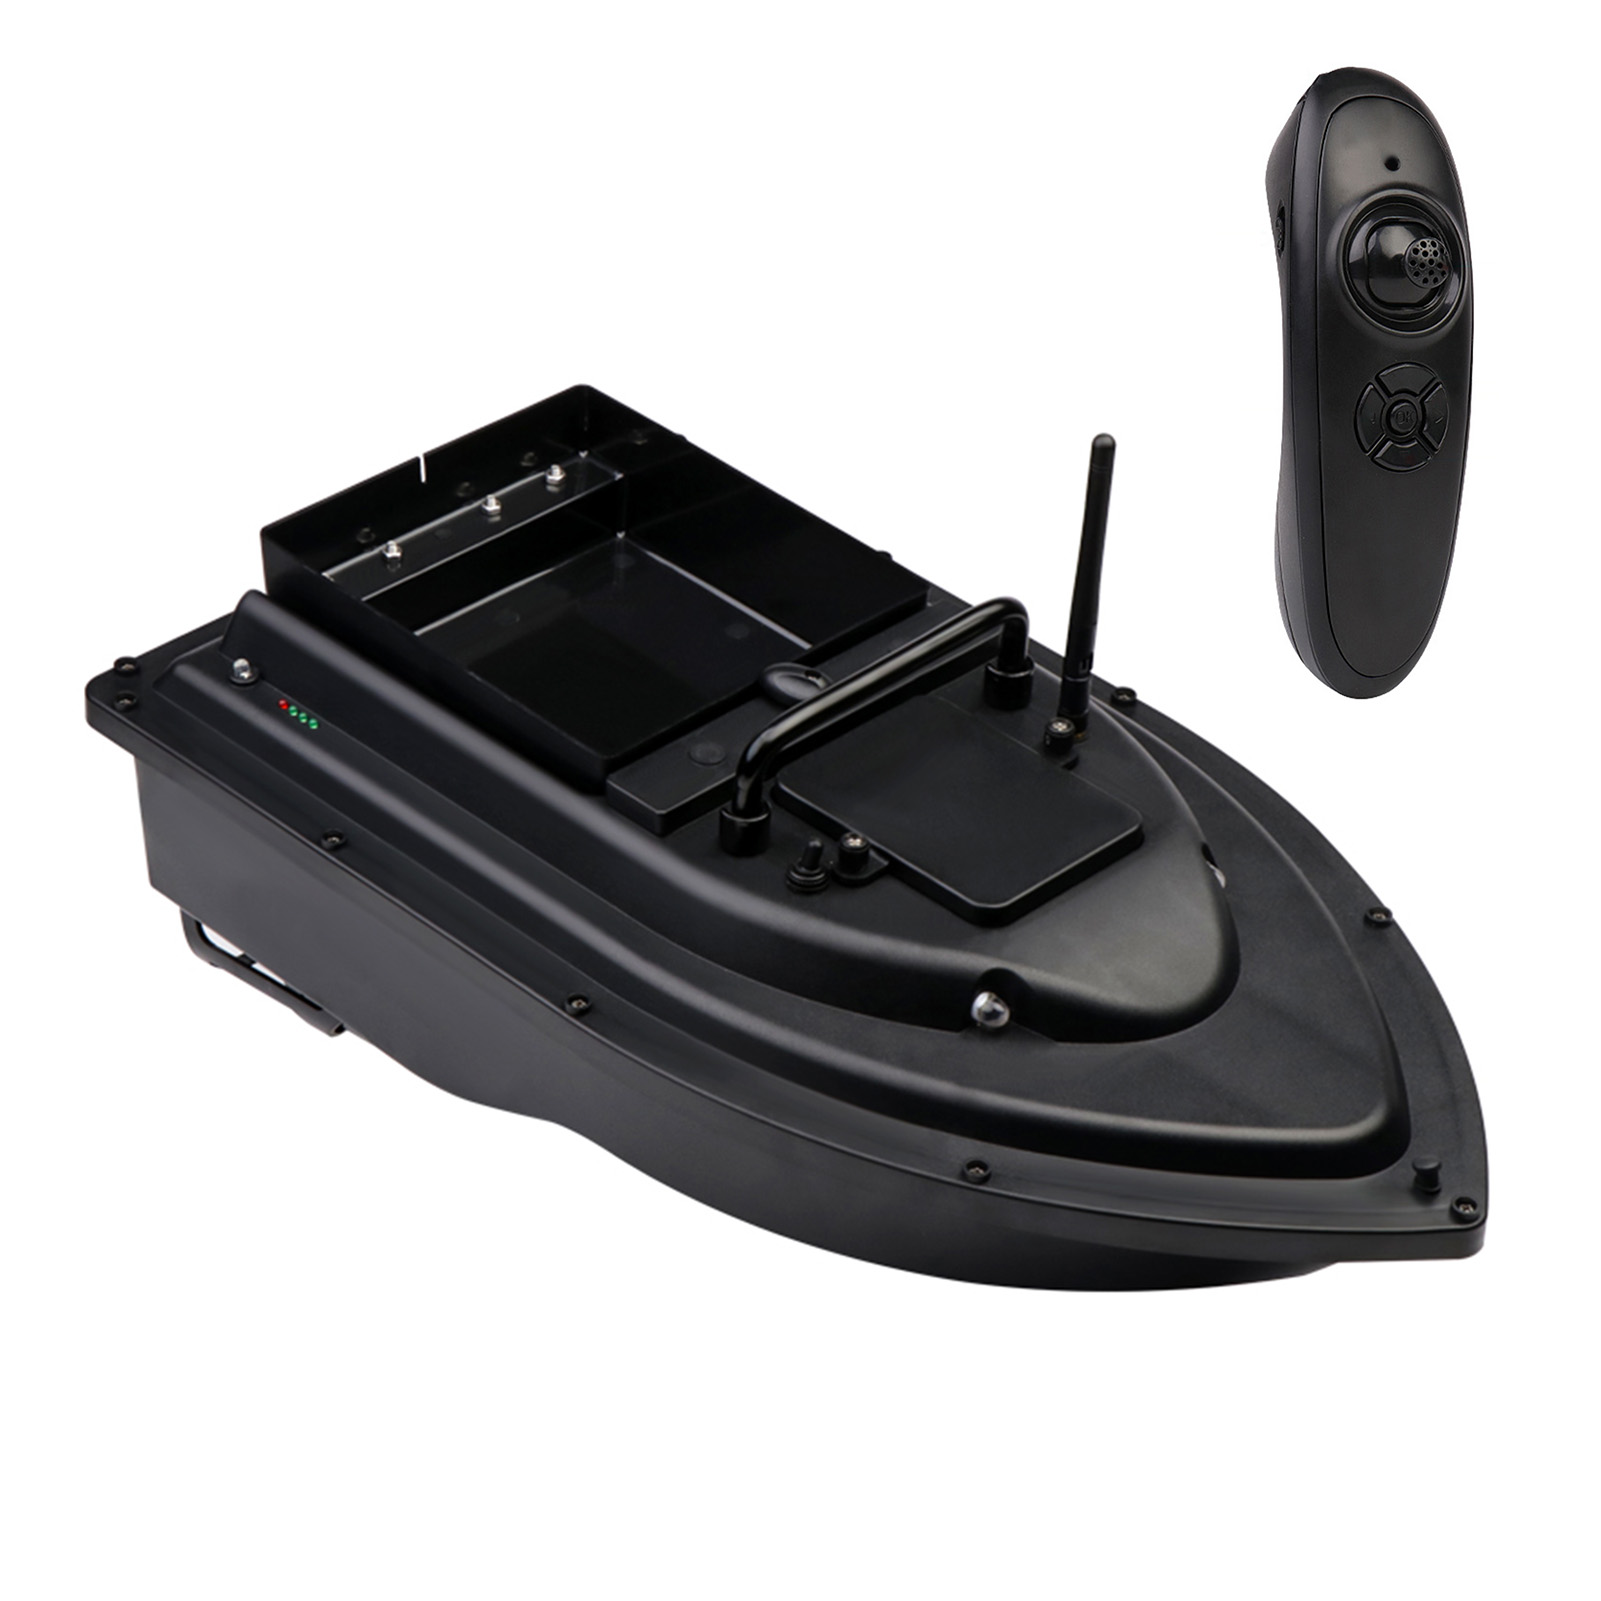 RC Bait Boat Wireless Fishing Feeder Fish Finder Ship Device 500m Remote Control Boat for Fishing Lovers And Fisherfolks